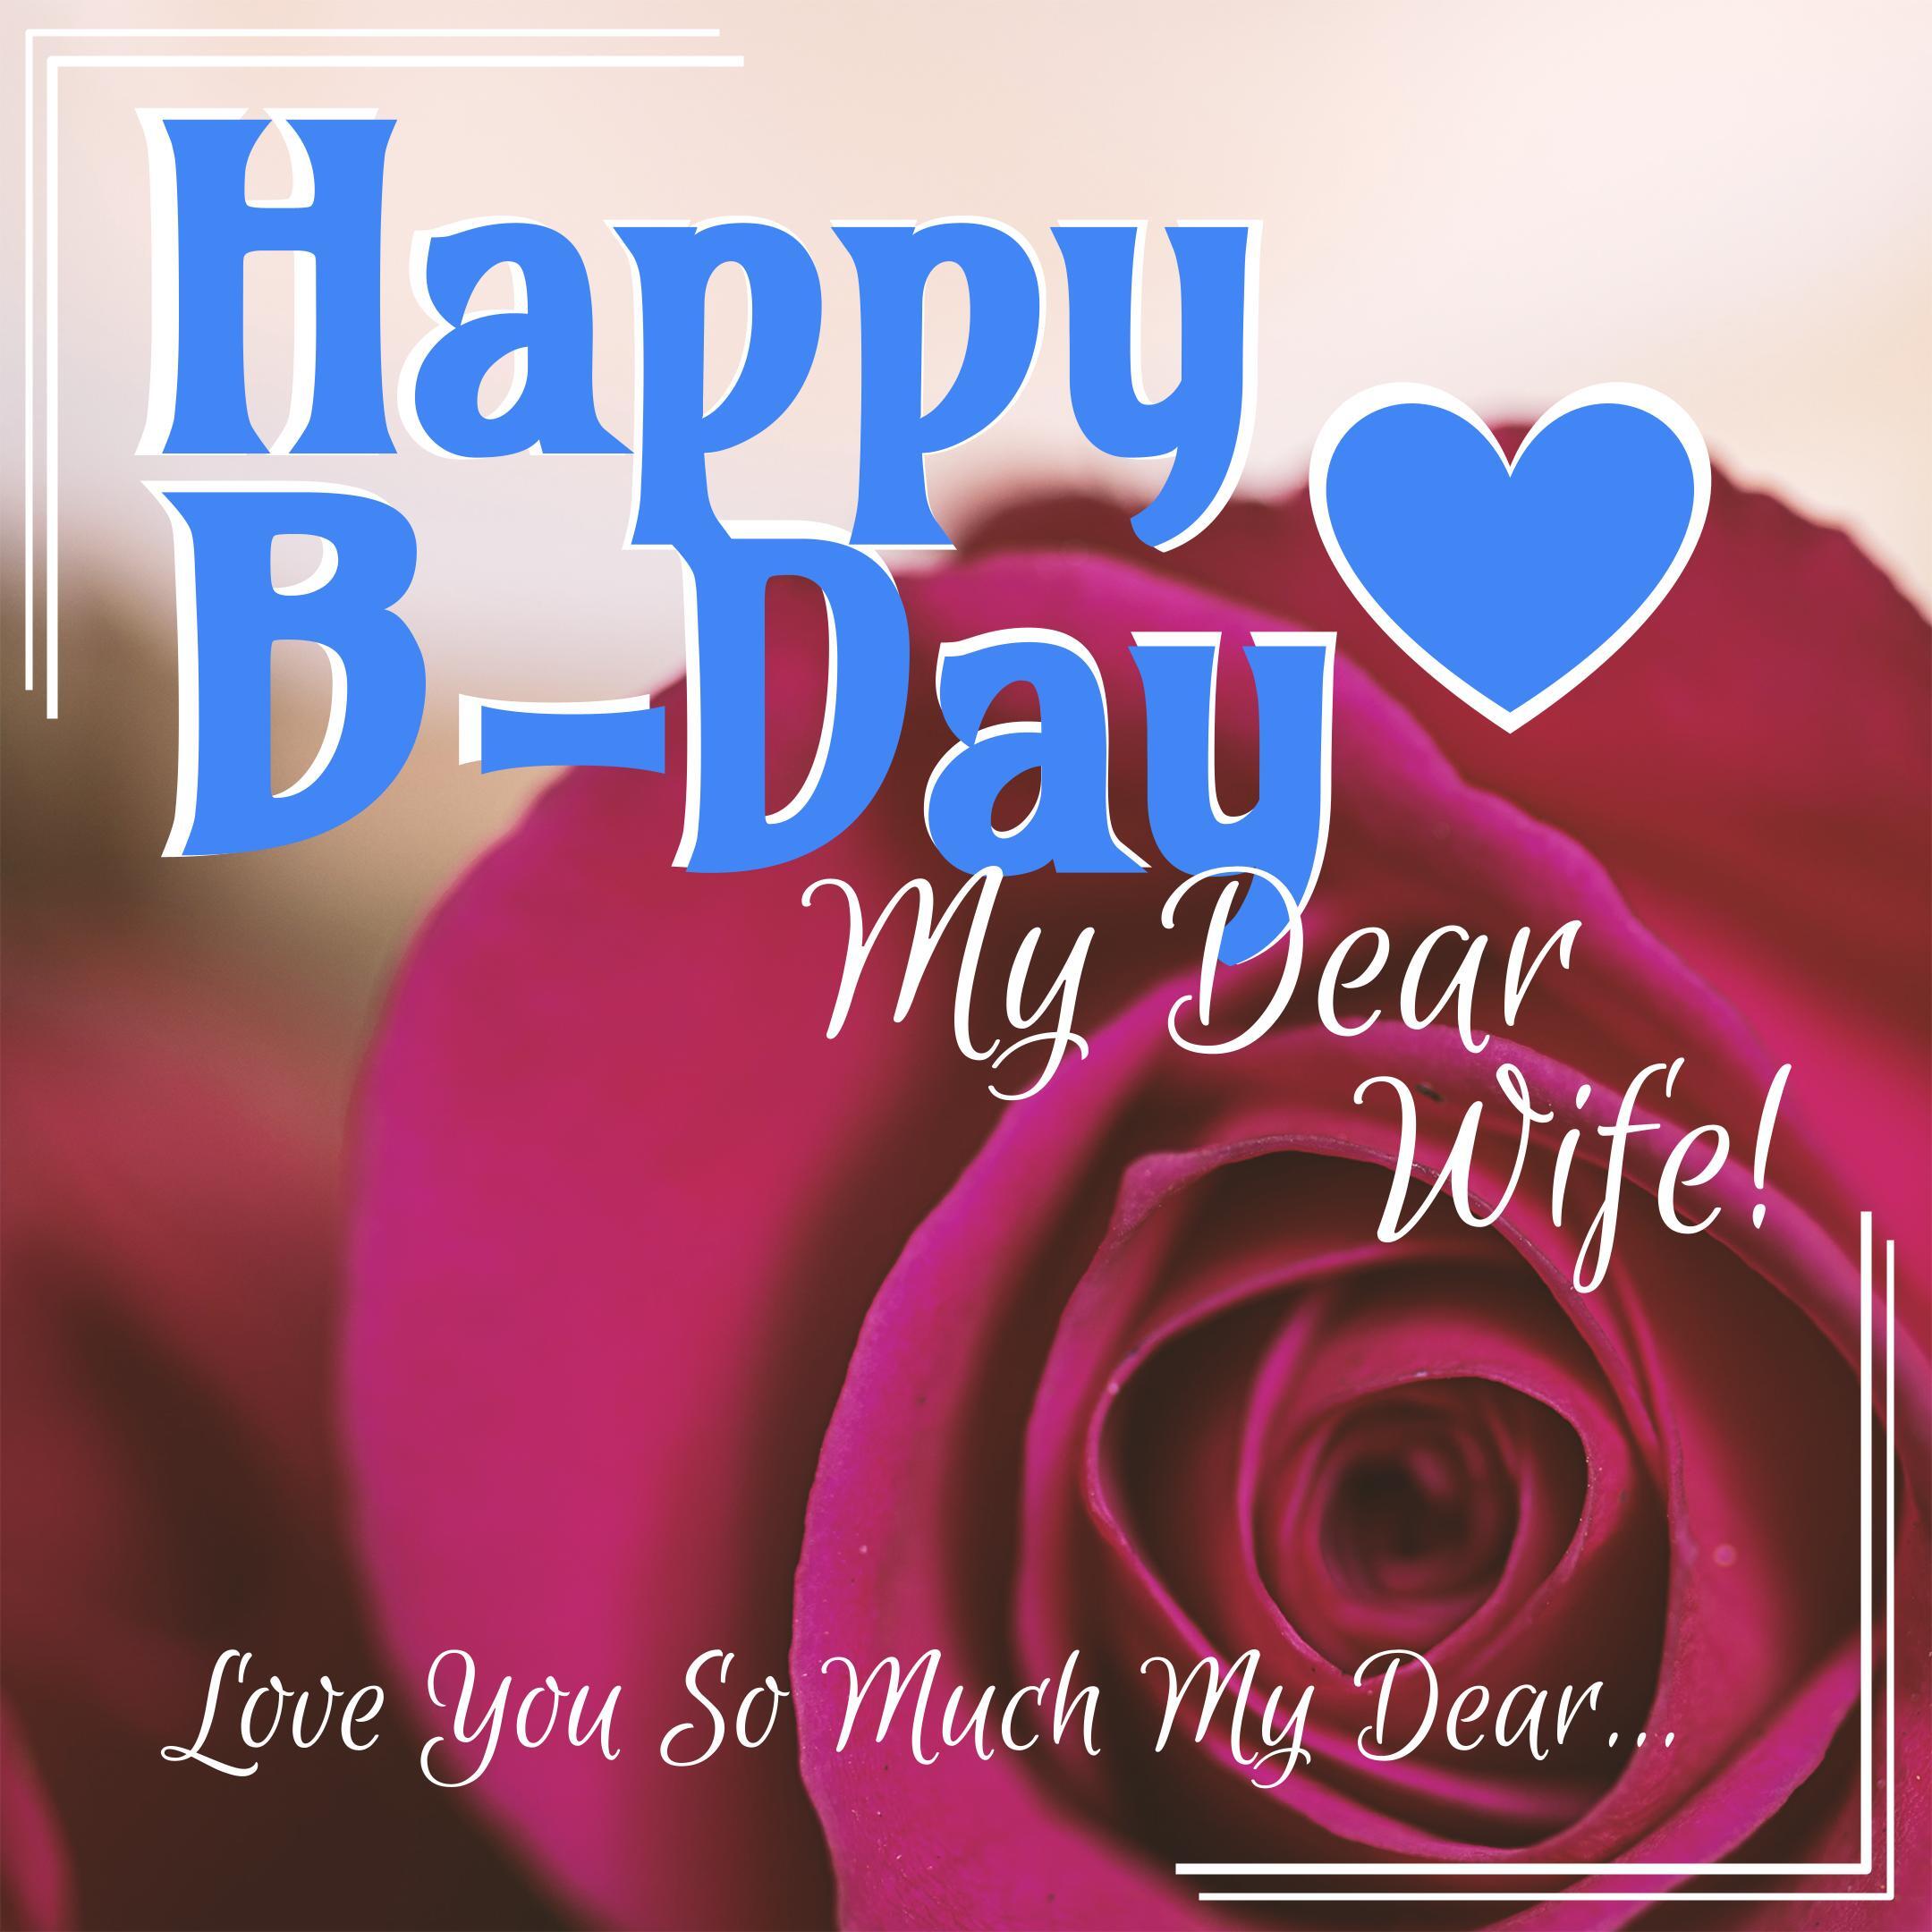 Free Happy Birthday Wishes and Images for Wife with Rose - birthdayimg.com